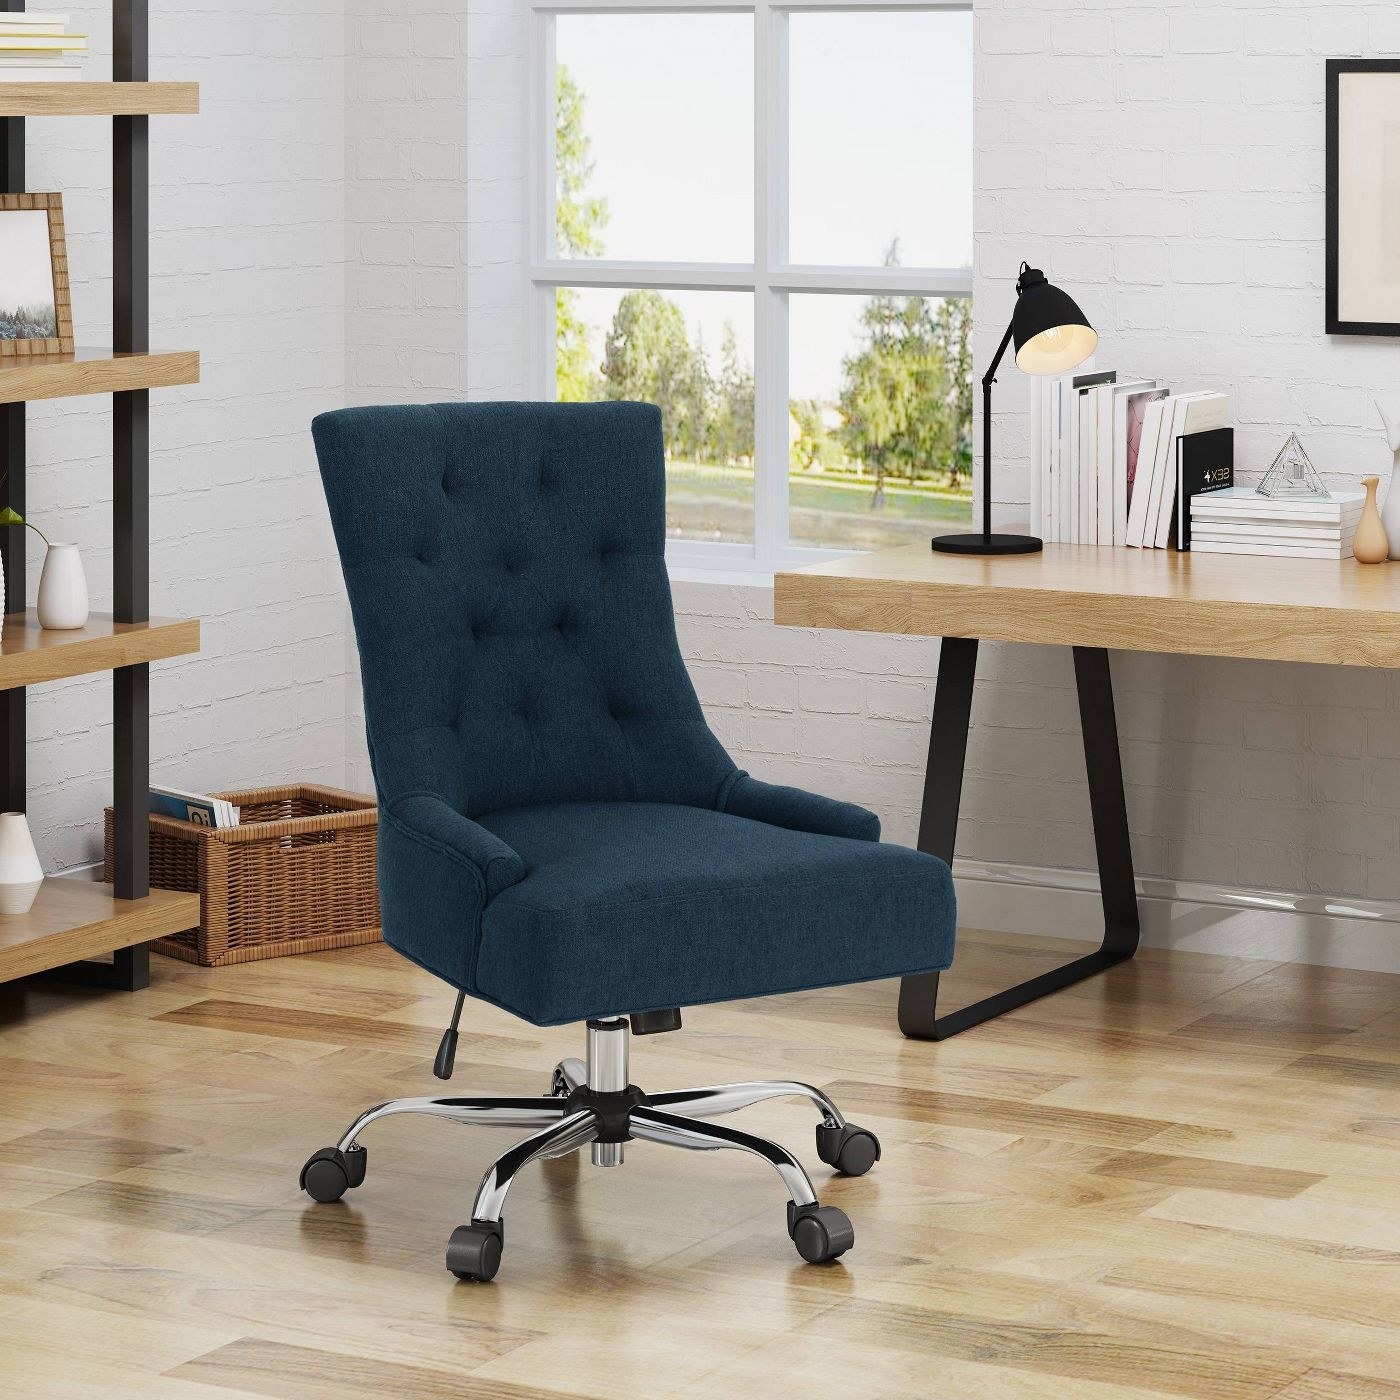 bluetufted wheeled desk chair in home office